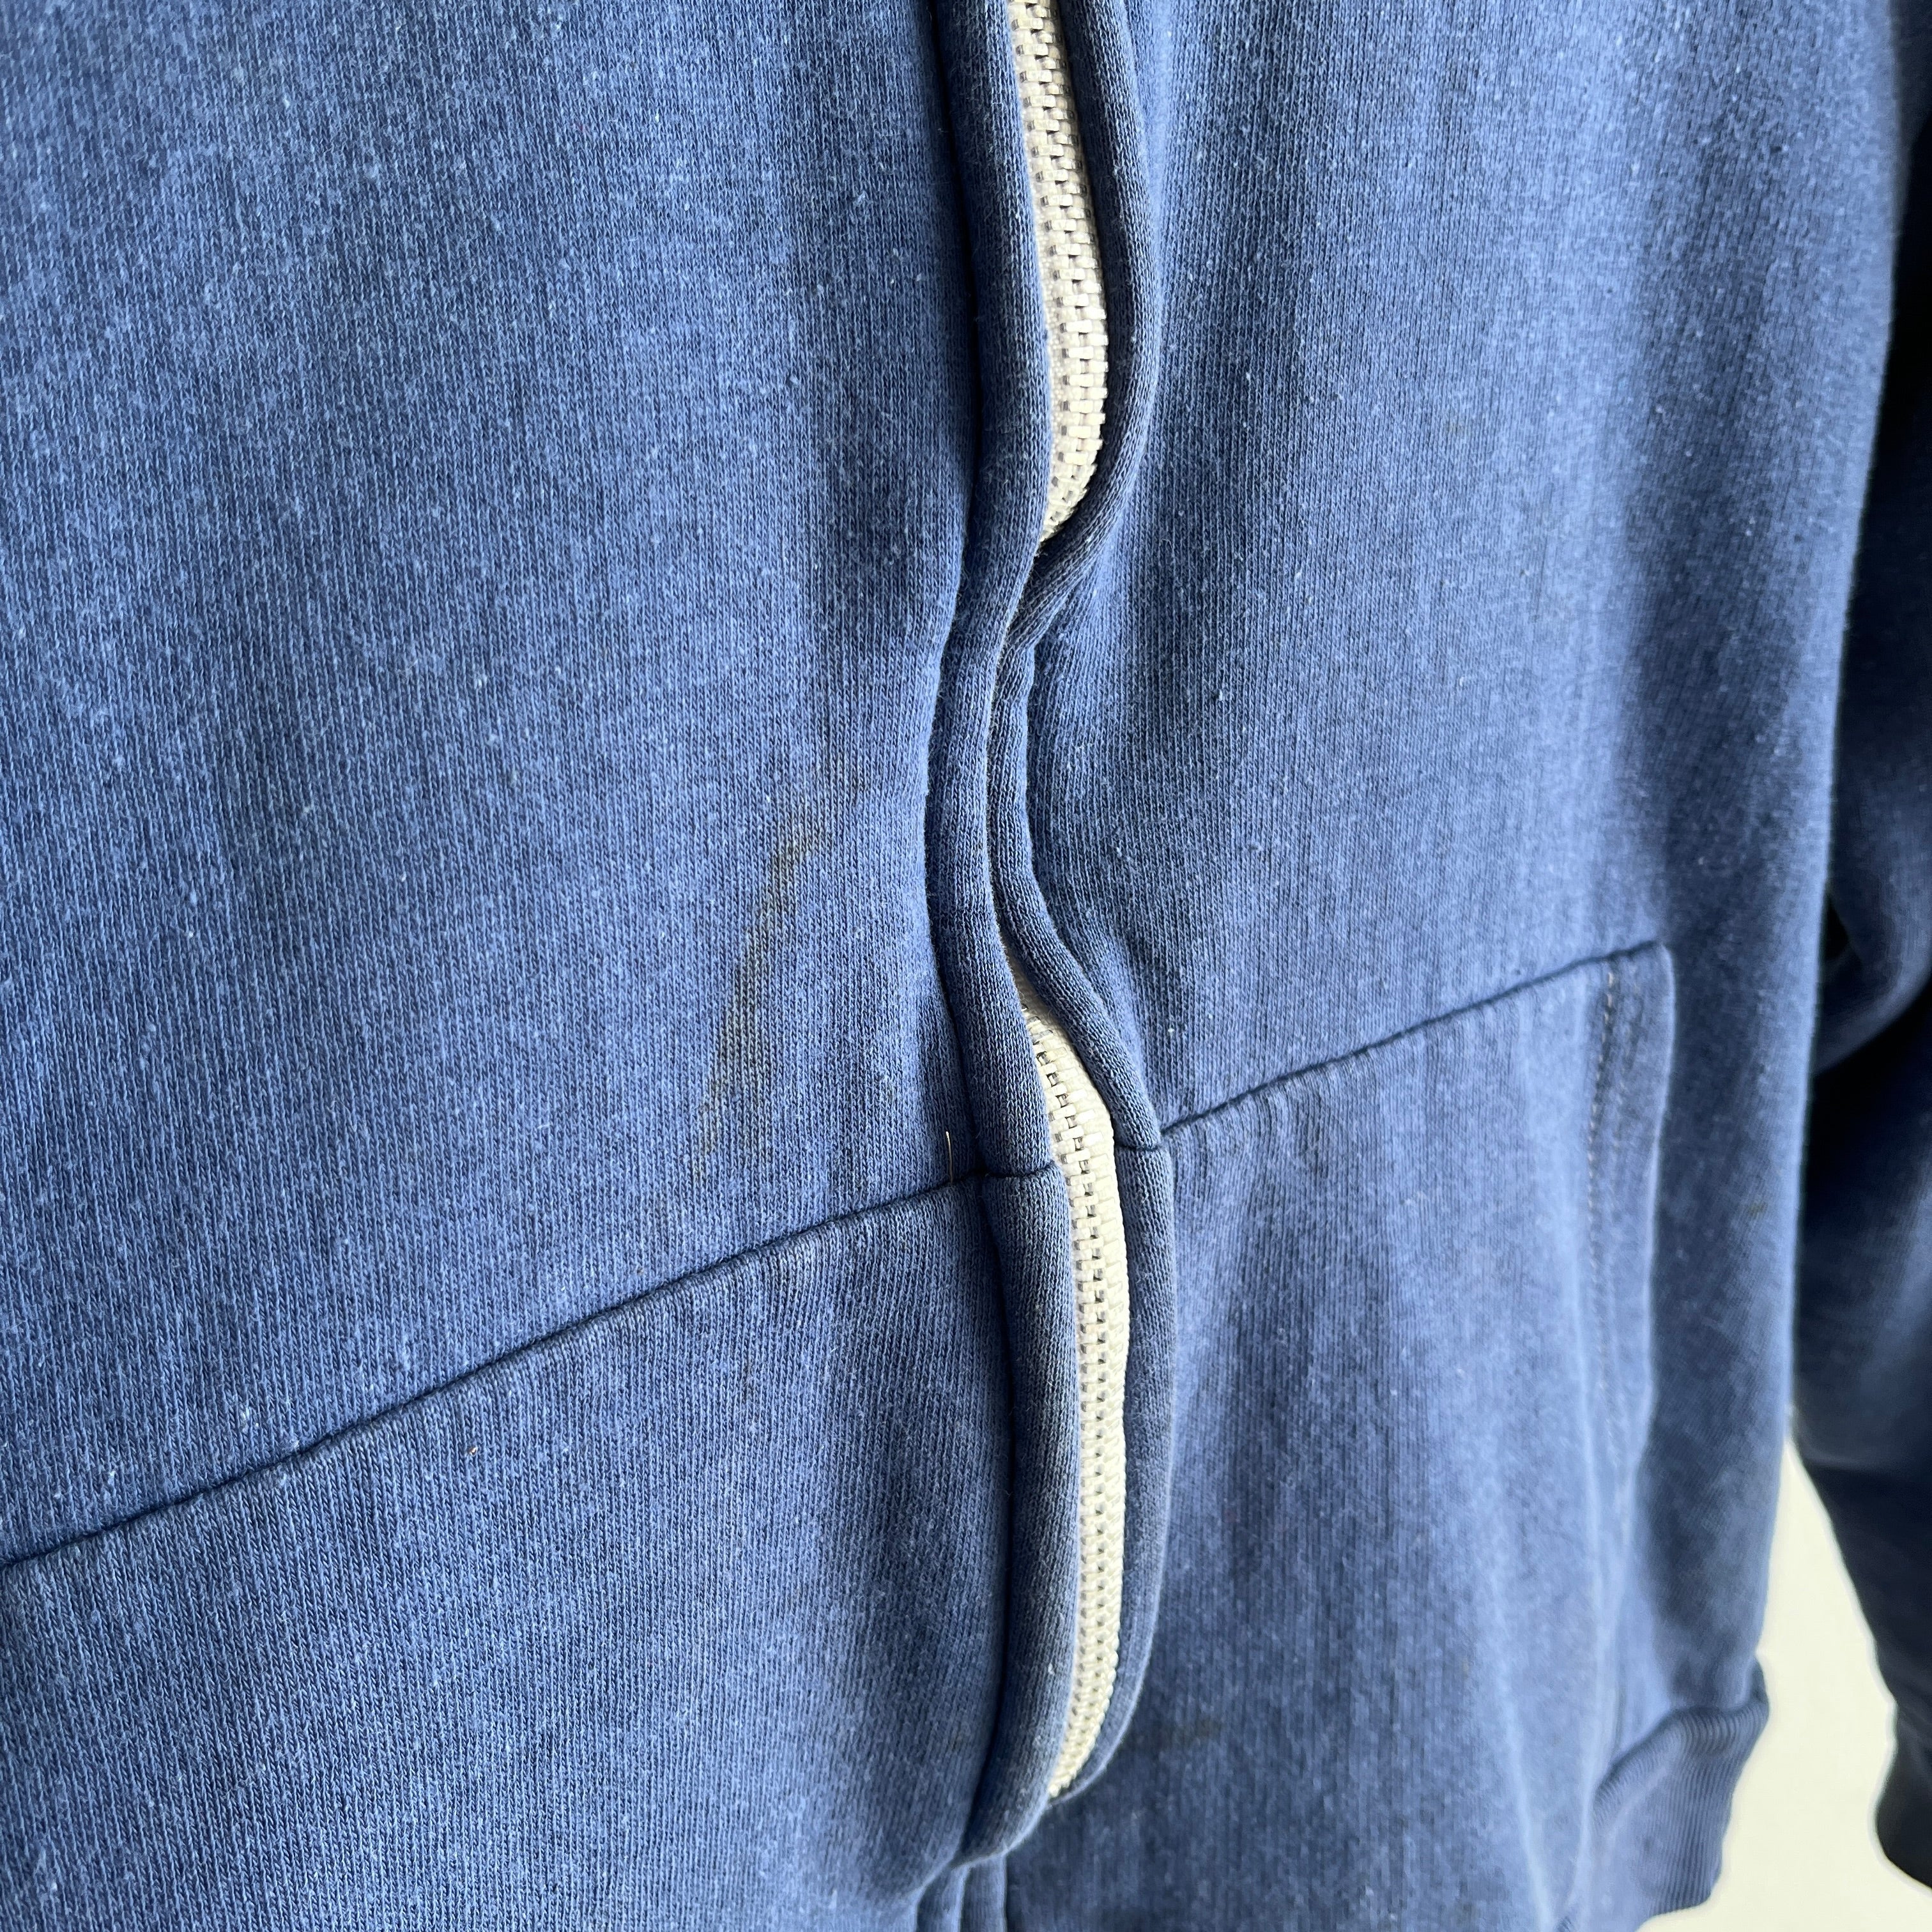 1970s Insulated Hoodie with Contrast Stitching - Personal Collection Piece